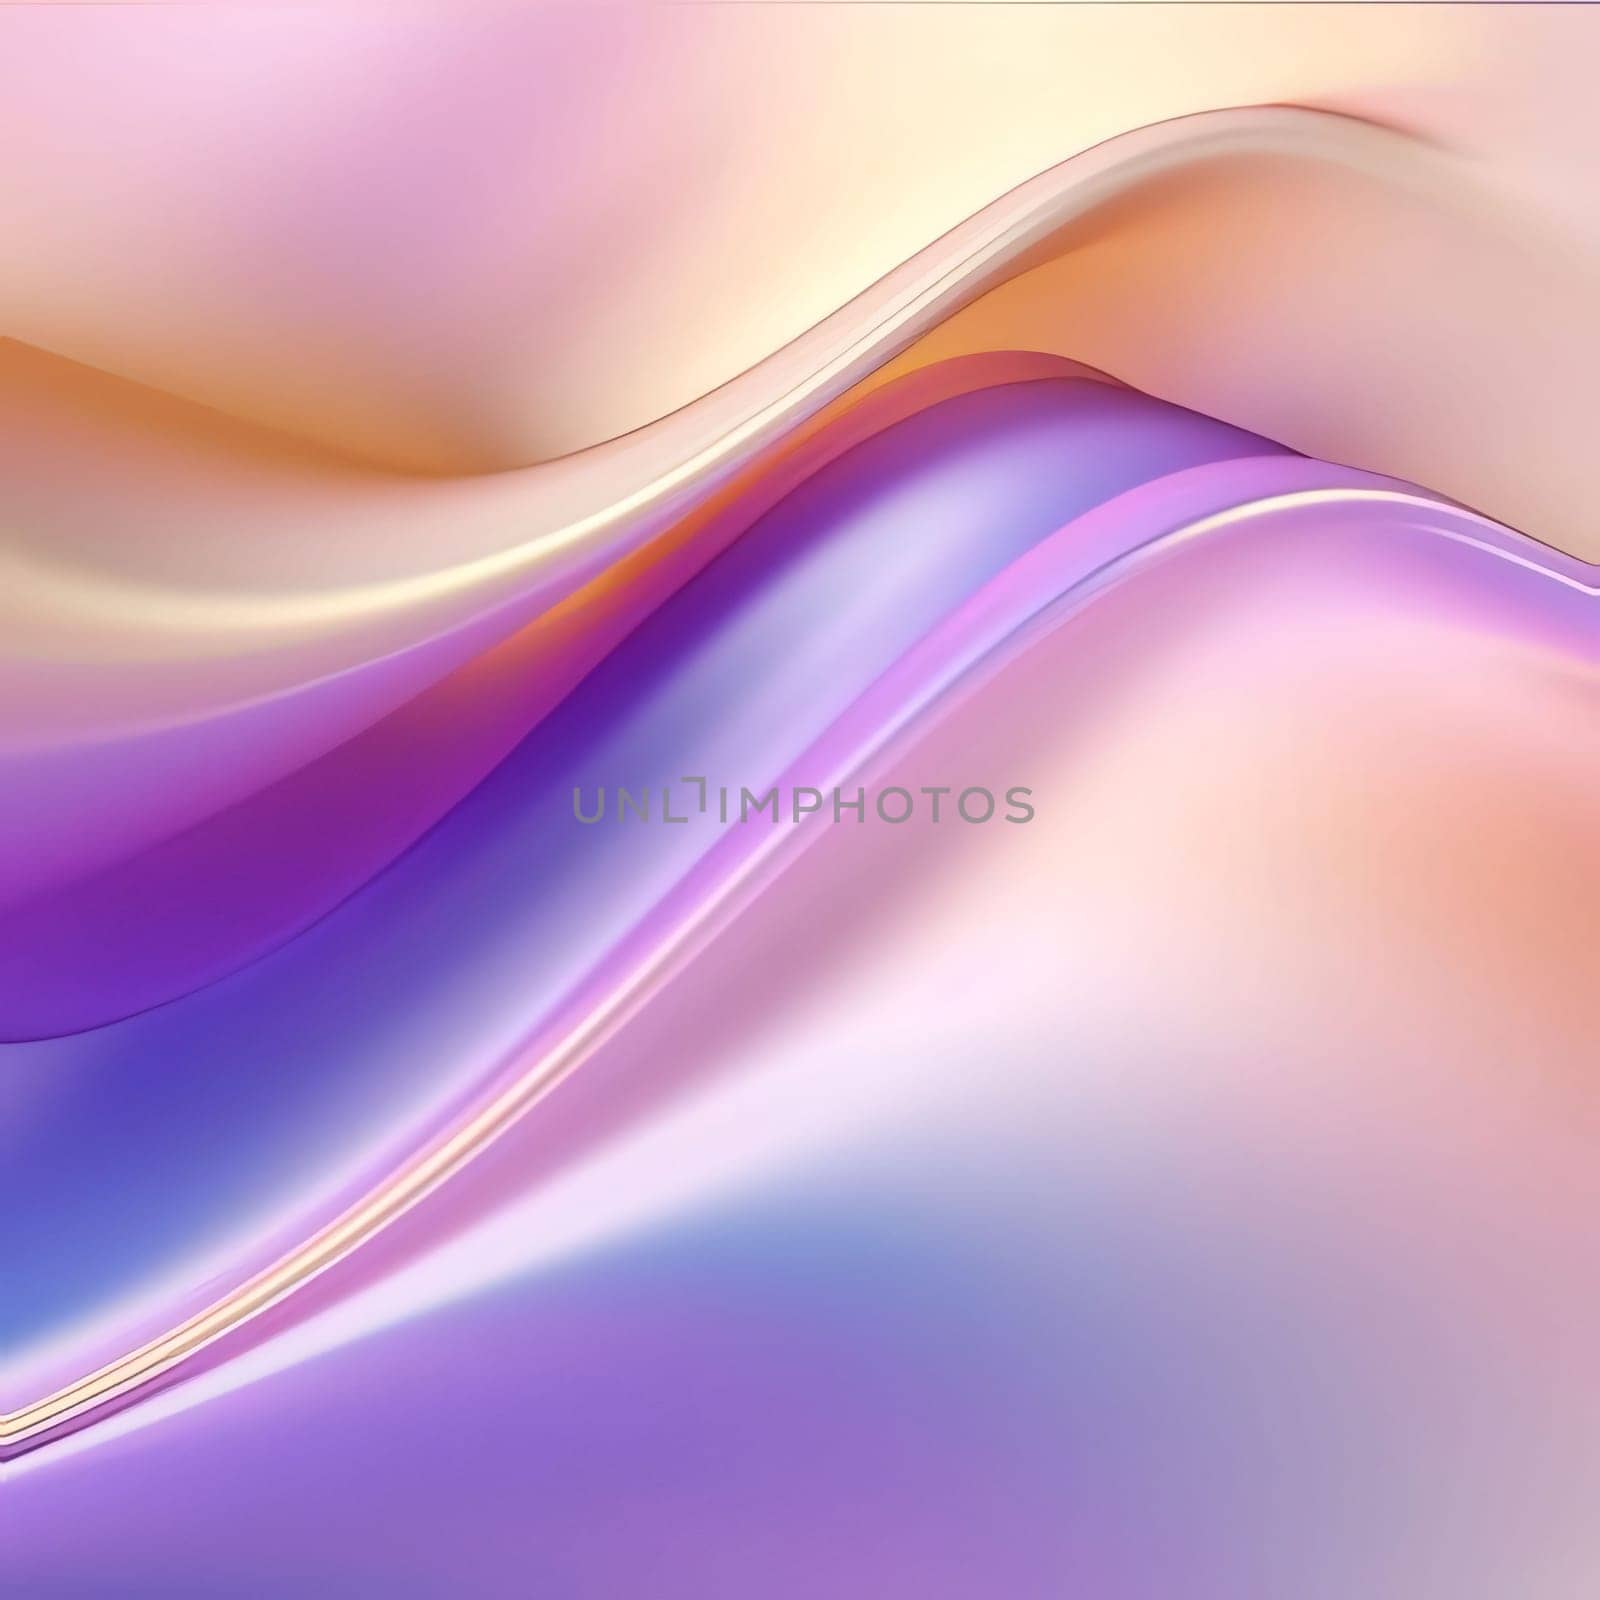 Abstract background design: abstract background with smooth lines in pink, blue and purple colors